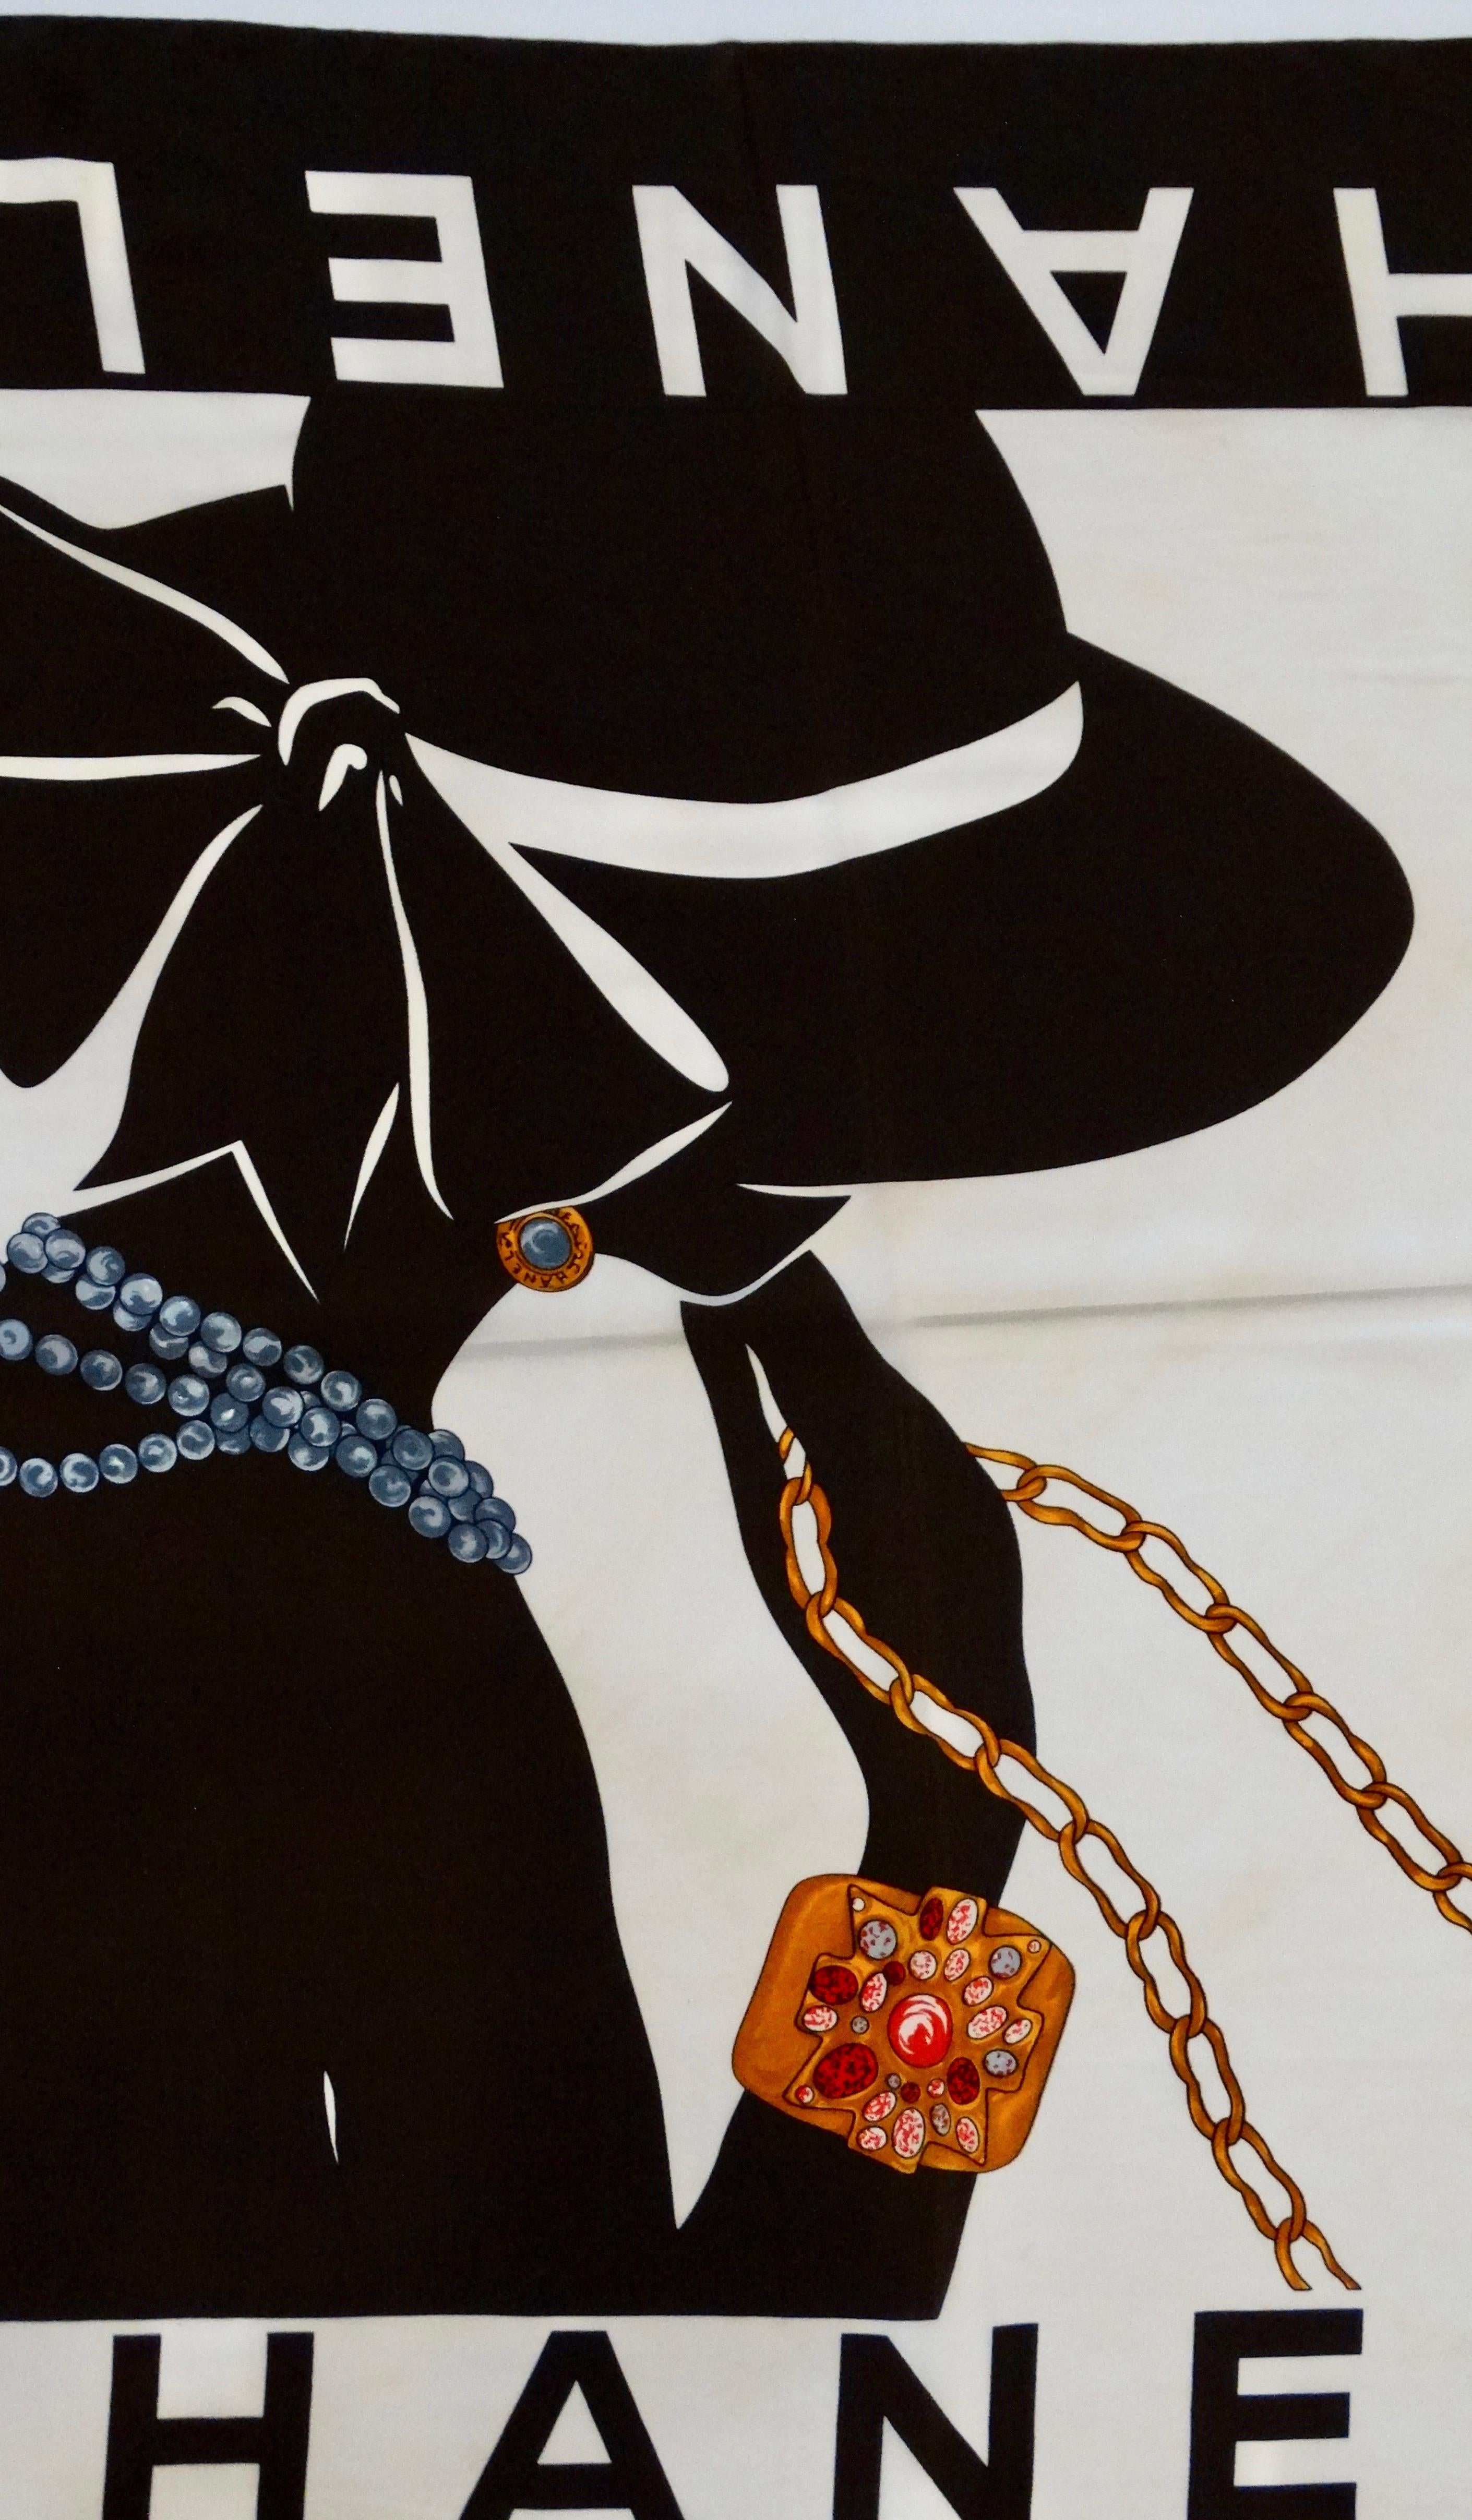 Feel like the ultimate Chanel lady in this scarf! Circa early 1990s, this Silk scarf features a contrasting black and white silhouette of a woman wearing a hat and decorated with colorful Chanel jewelry. 